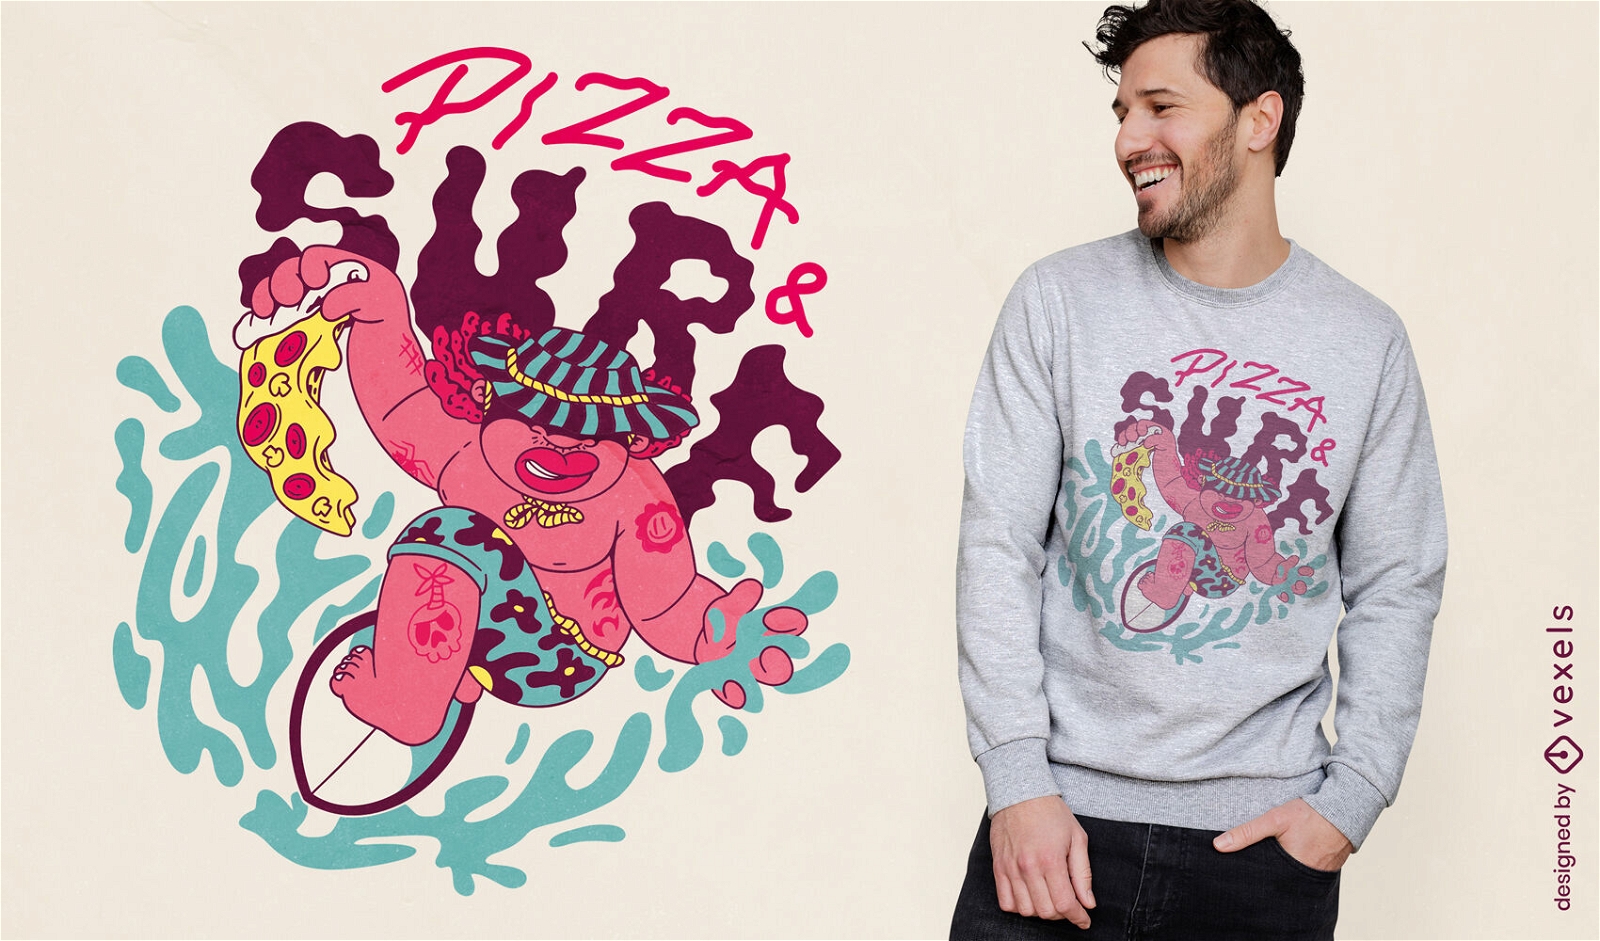 Man surfing with pizza t-shirt design